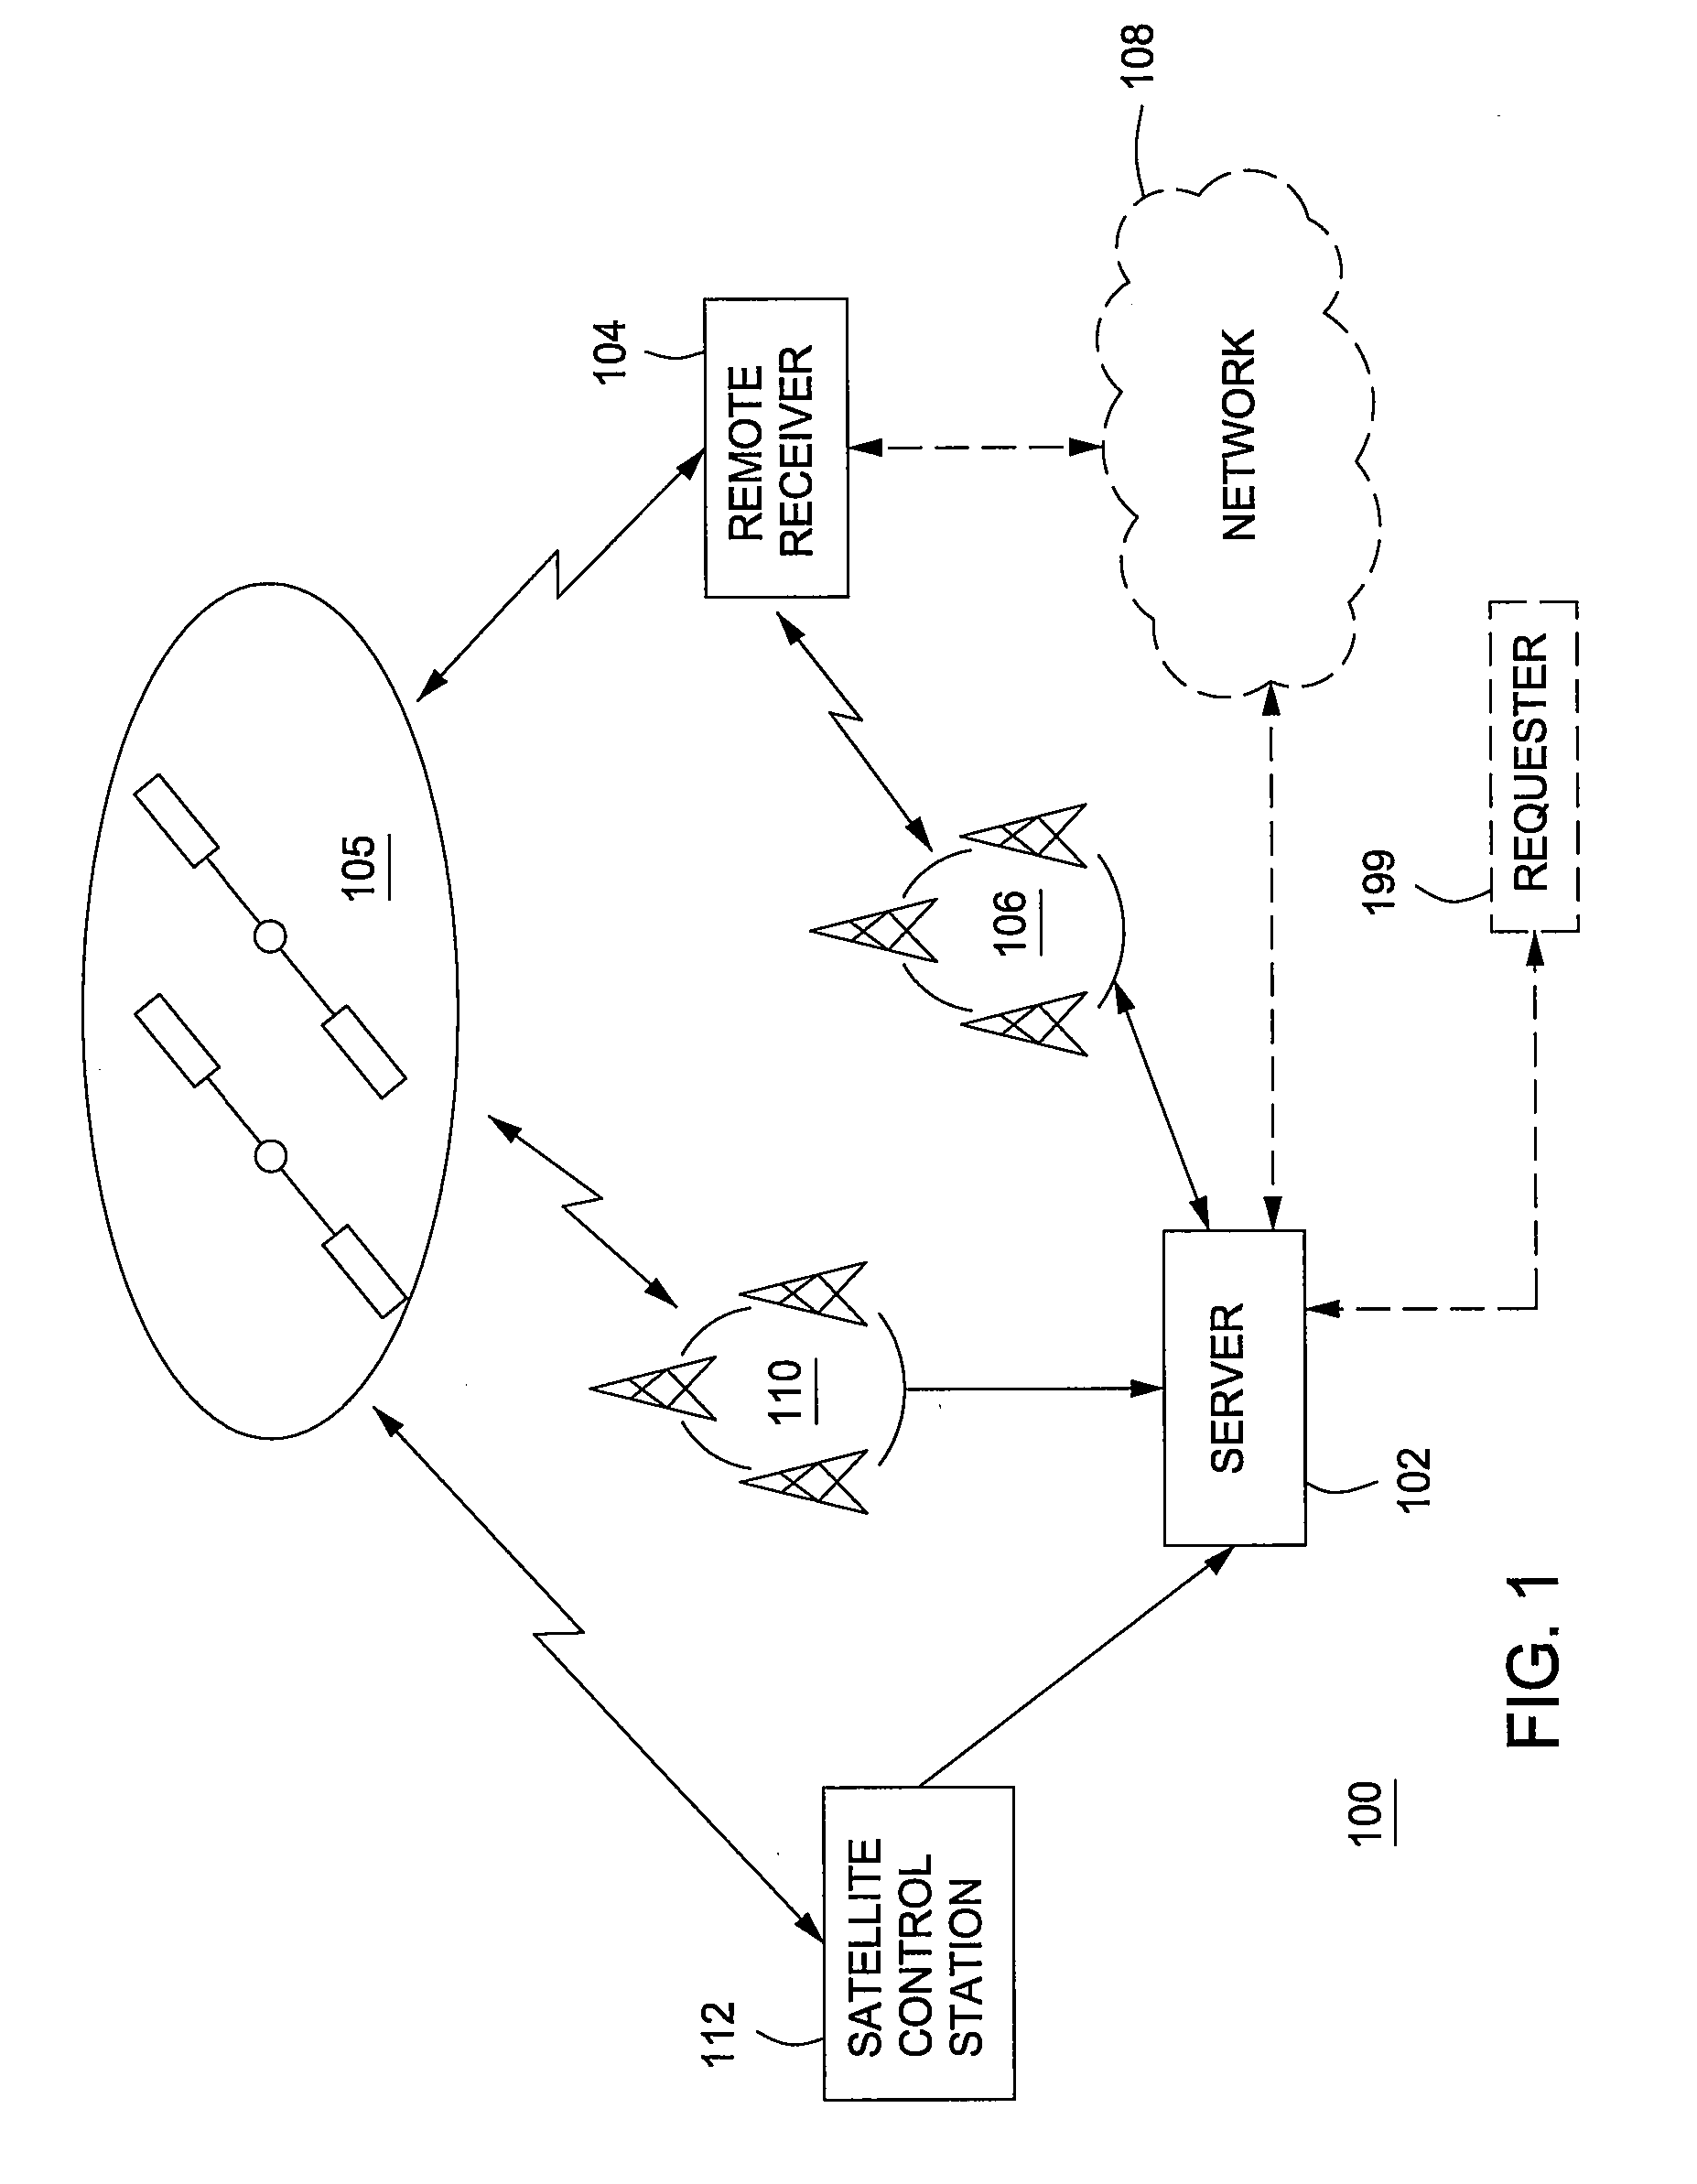 Method and apparatus for improving accuracy and/or integrity of long-term-orbit information for a global-navigation-satellite system